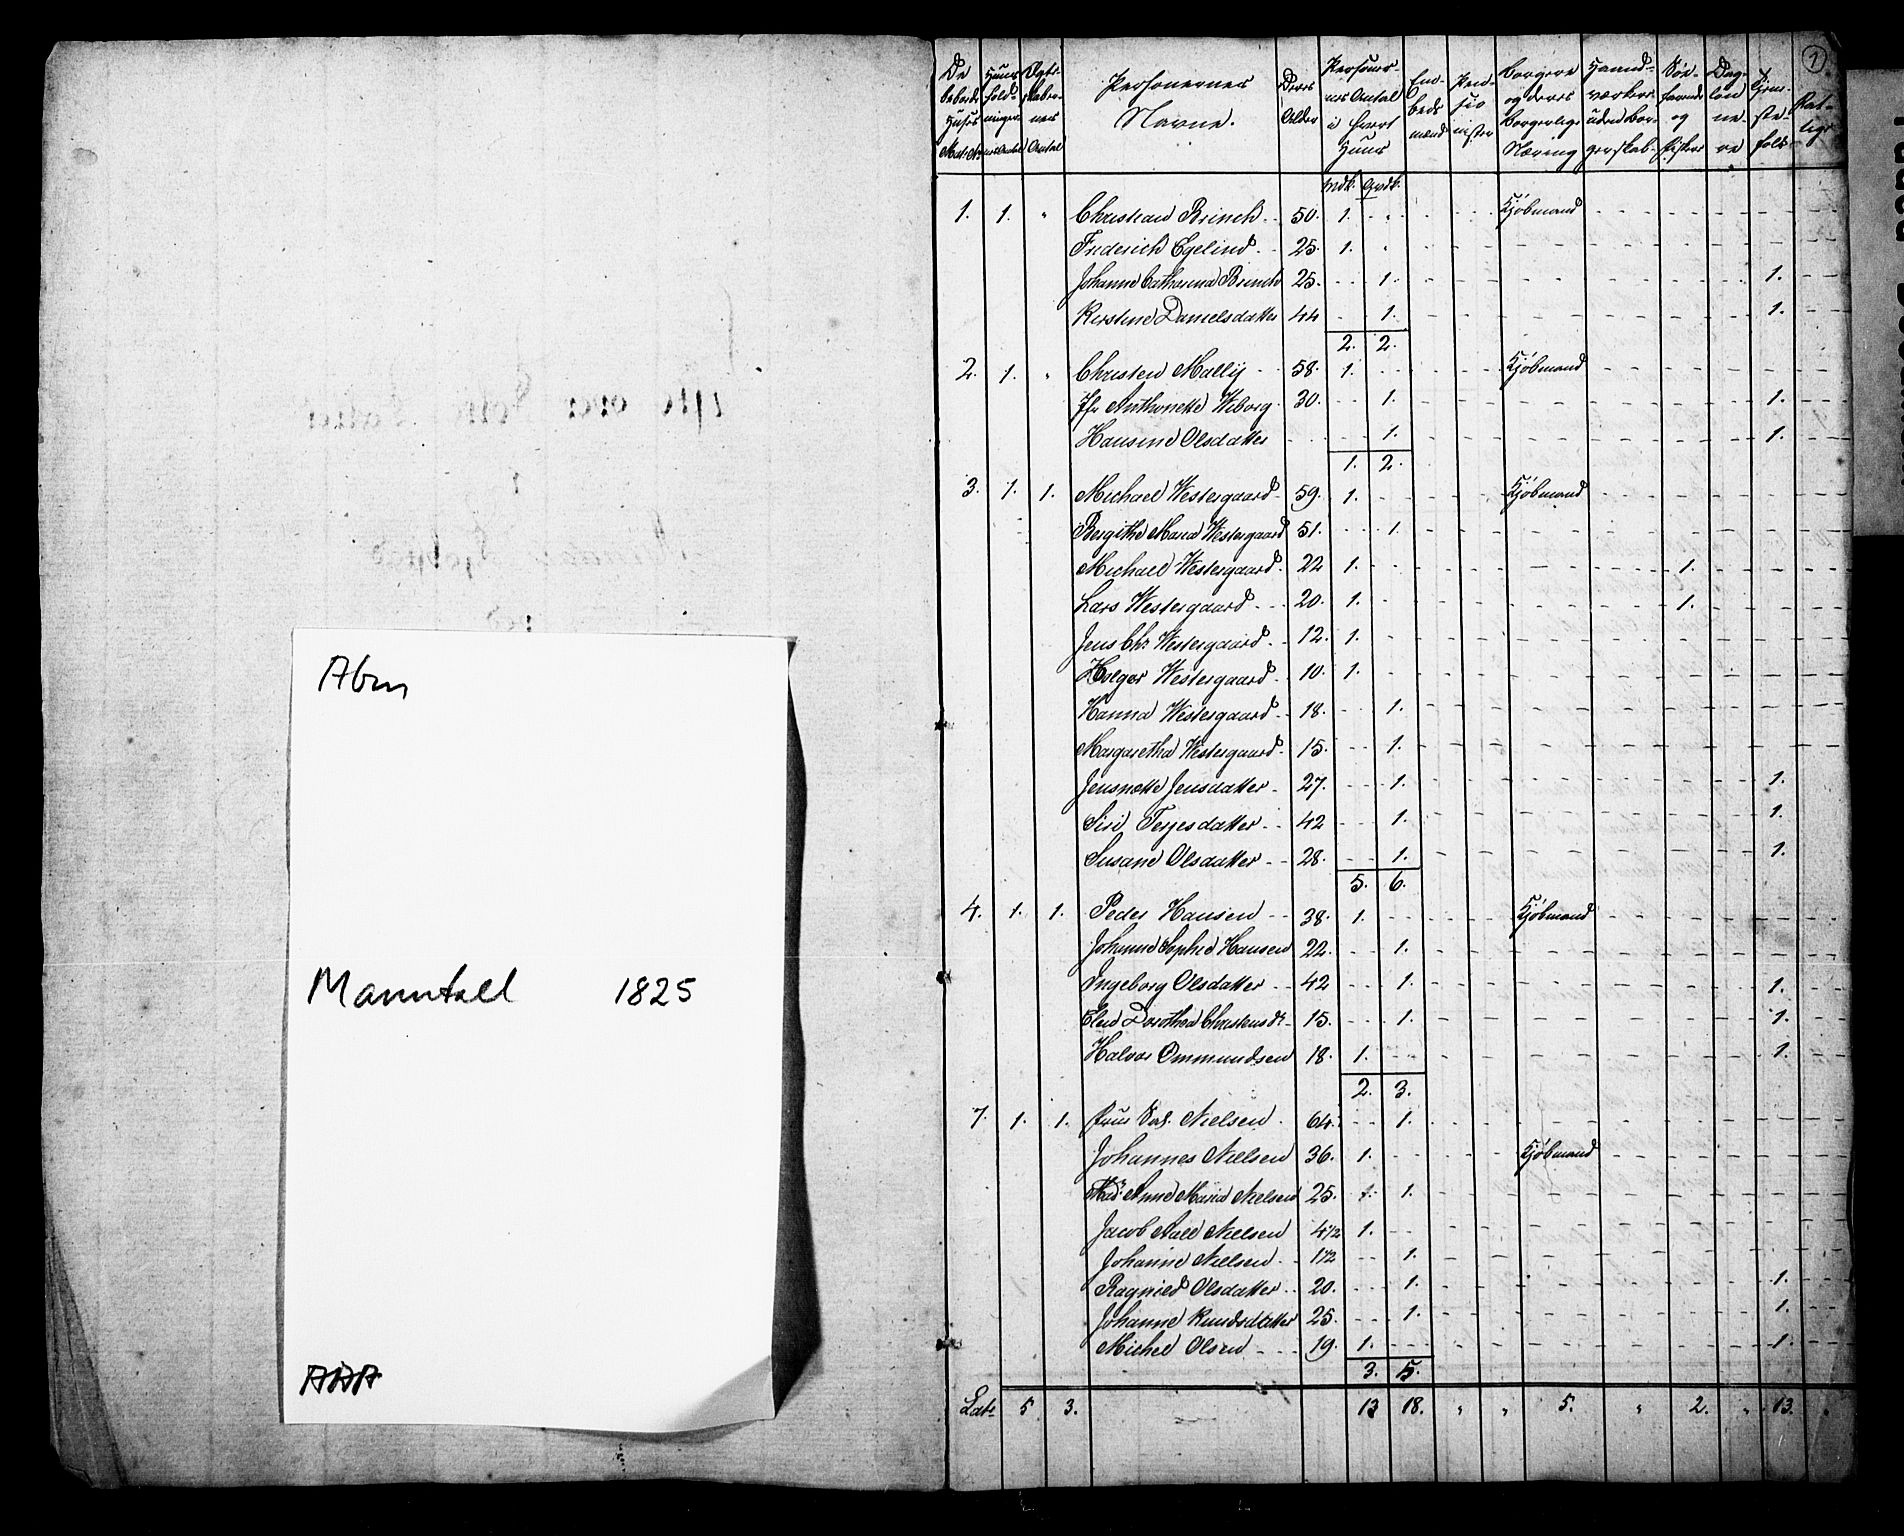 , Census 1825 for Arendal, 1825, p. 2